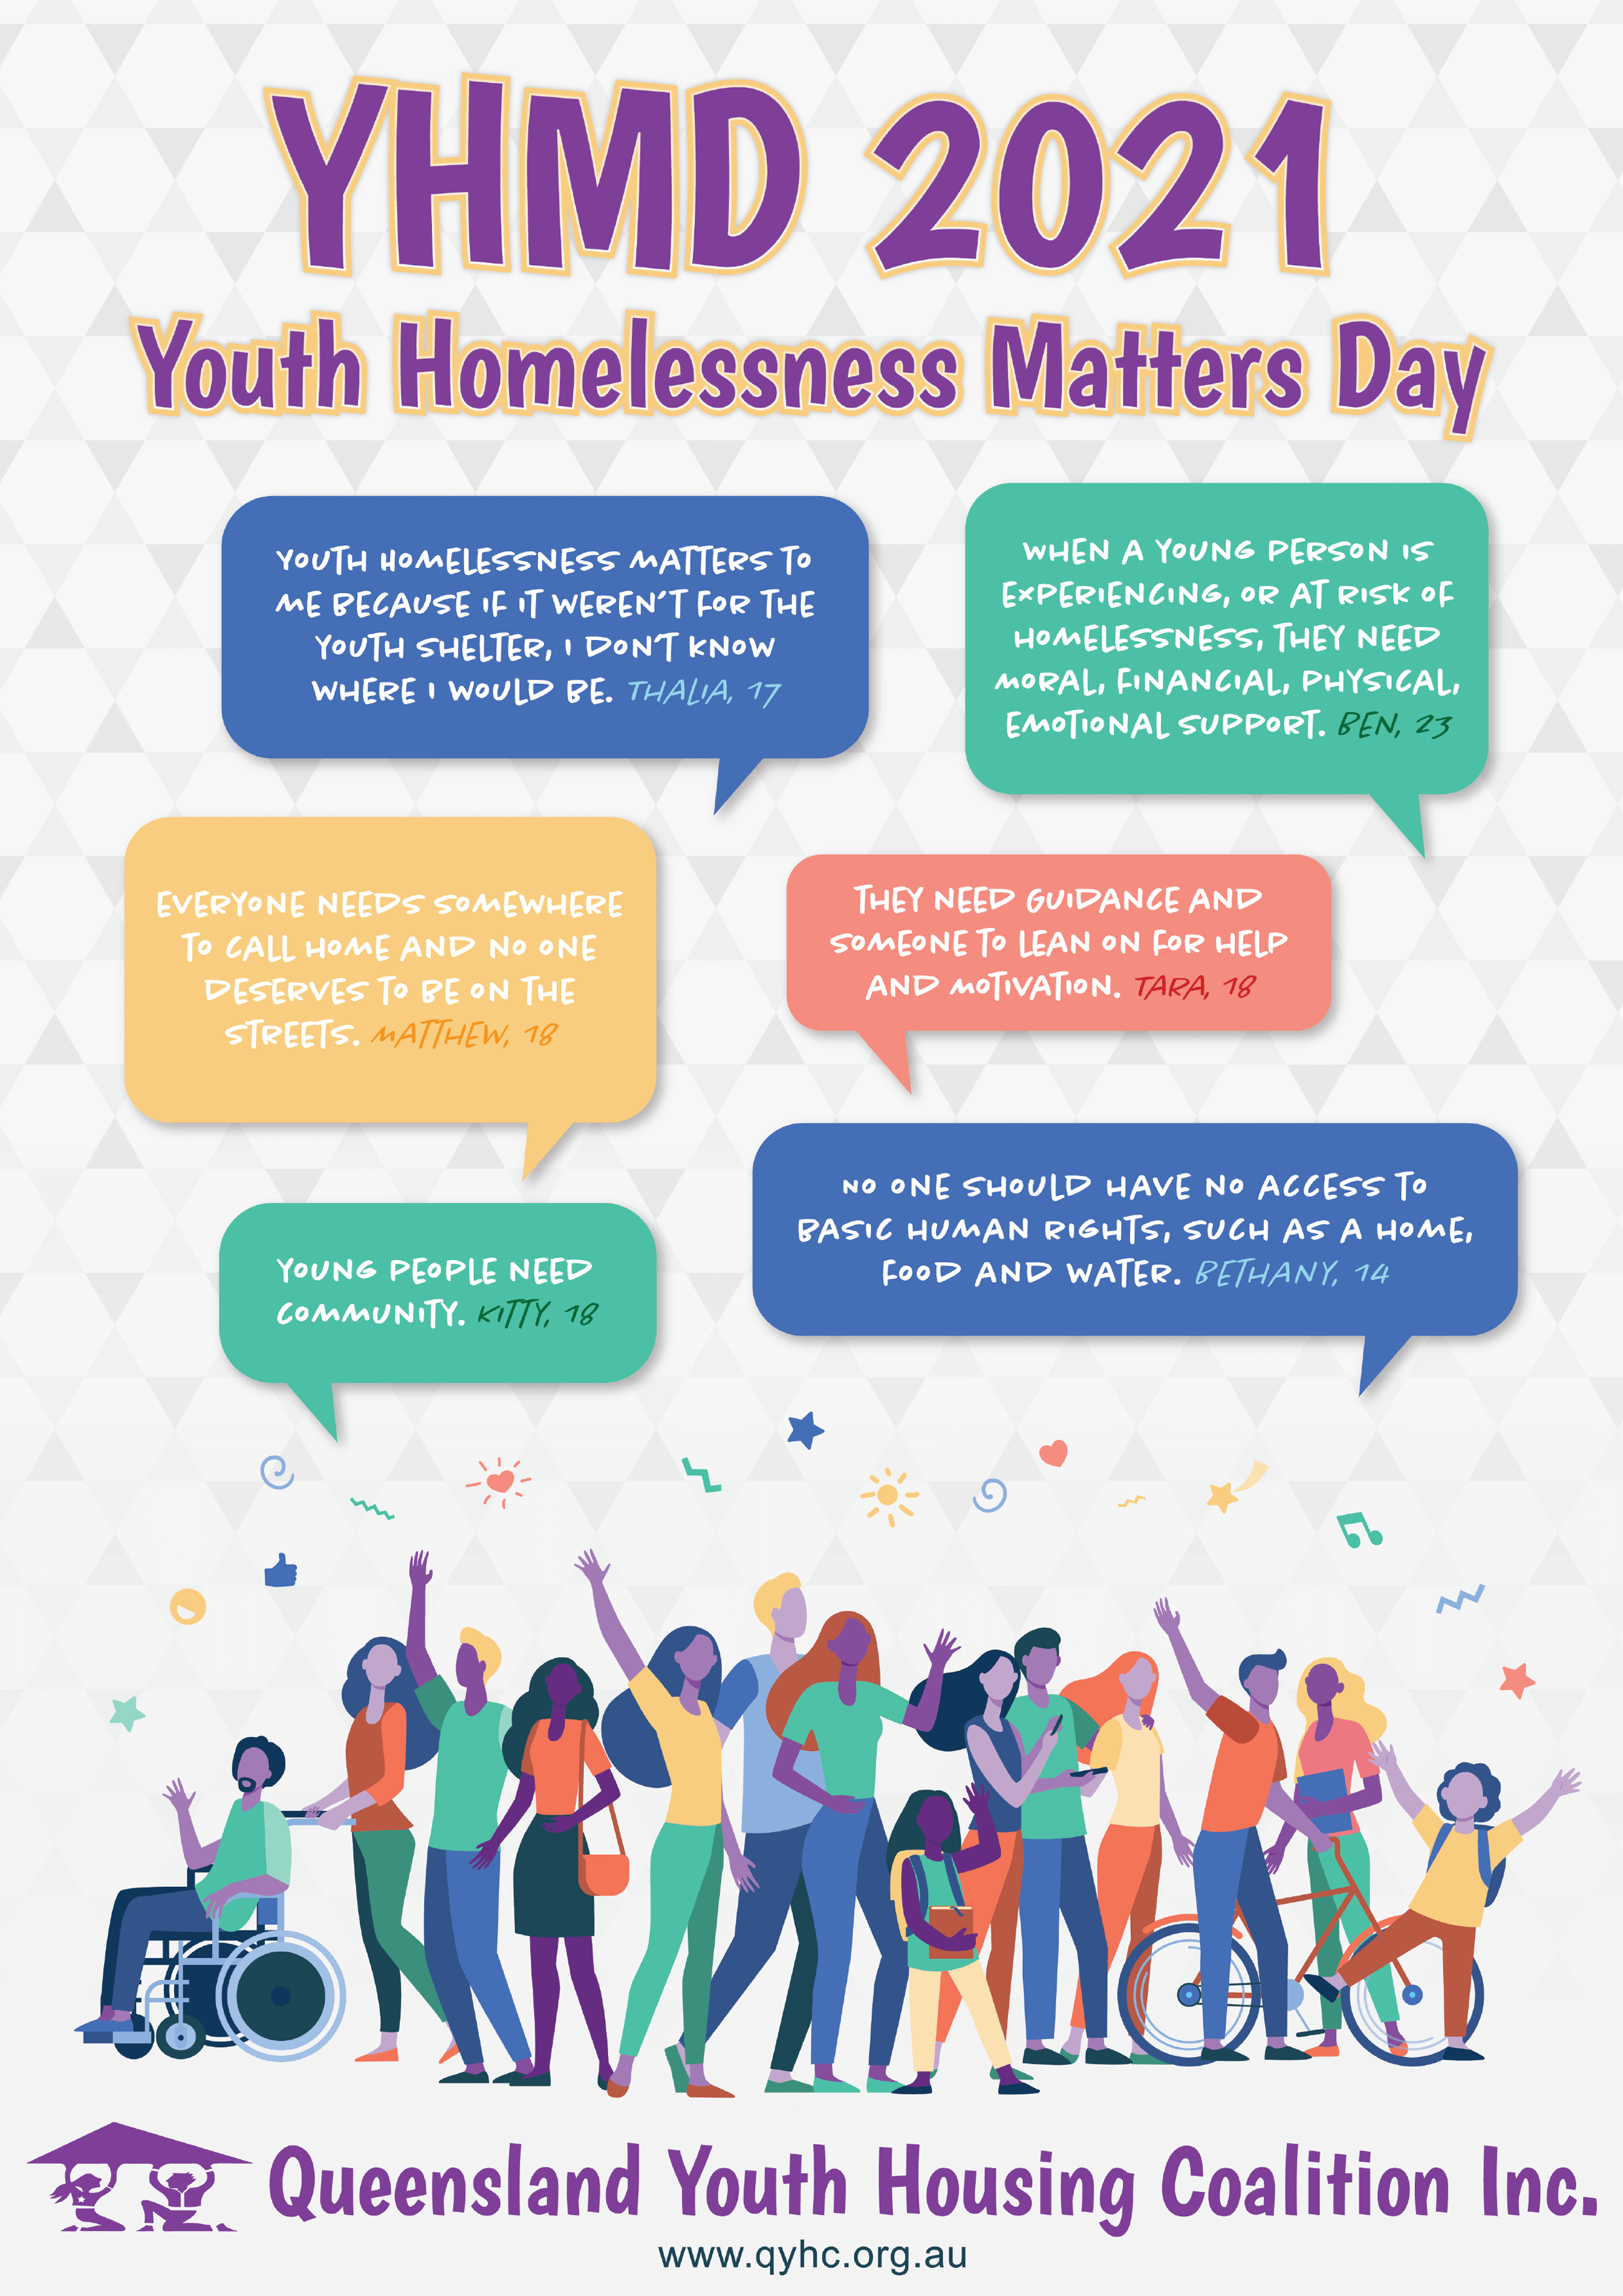 Youth Homelessness Matters Day 2021